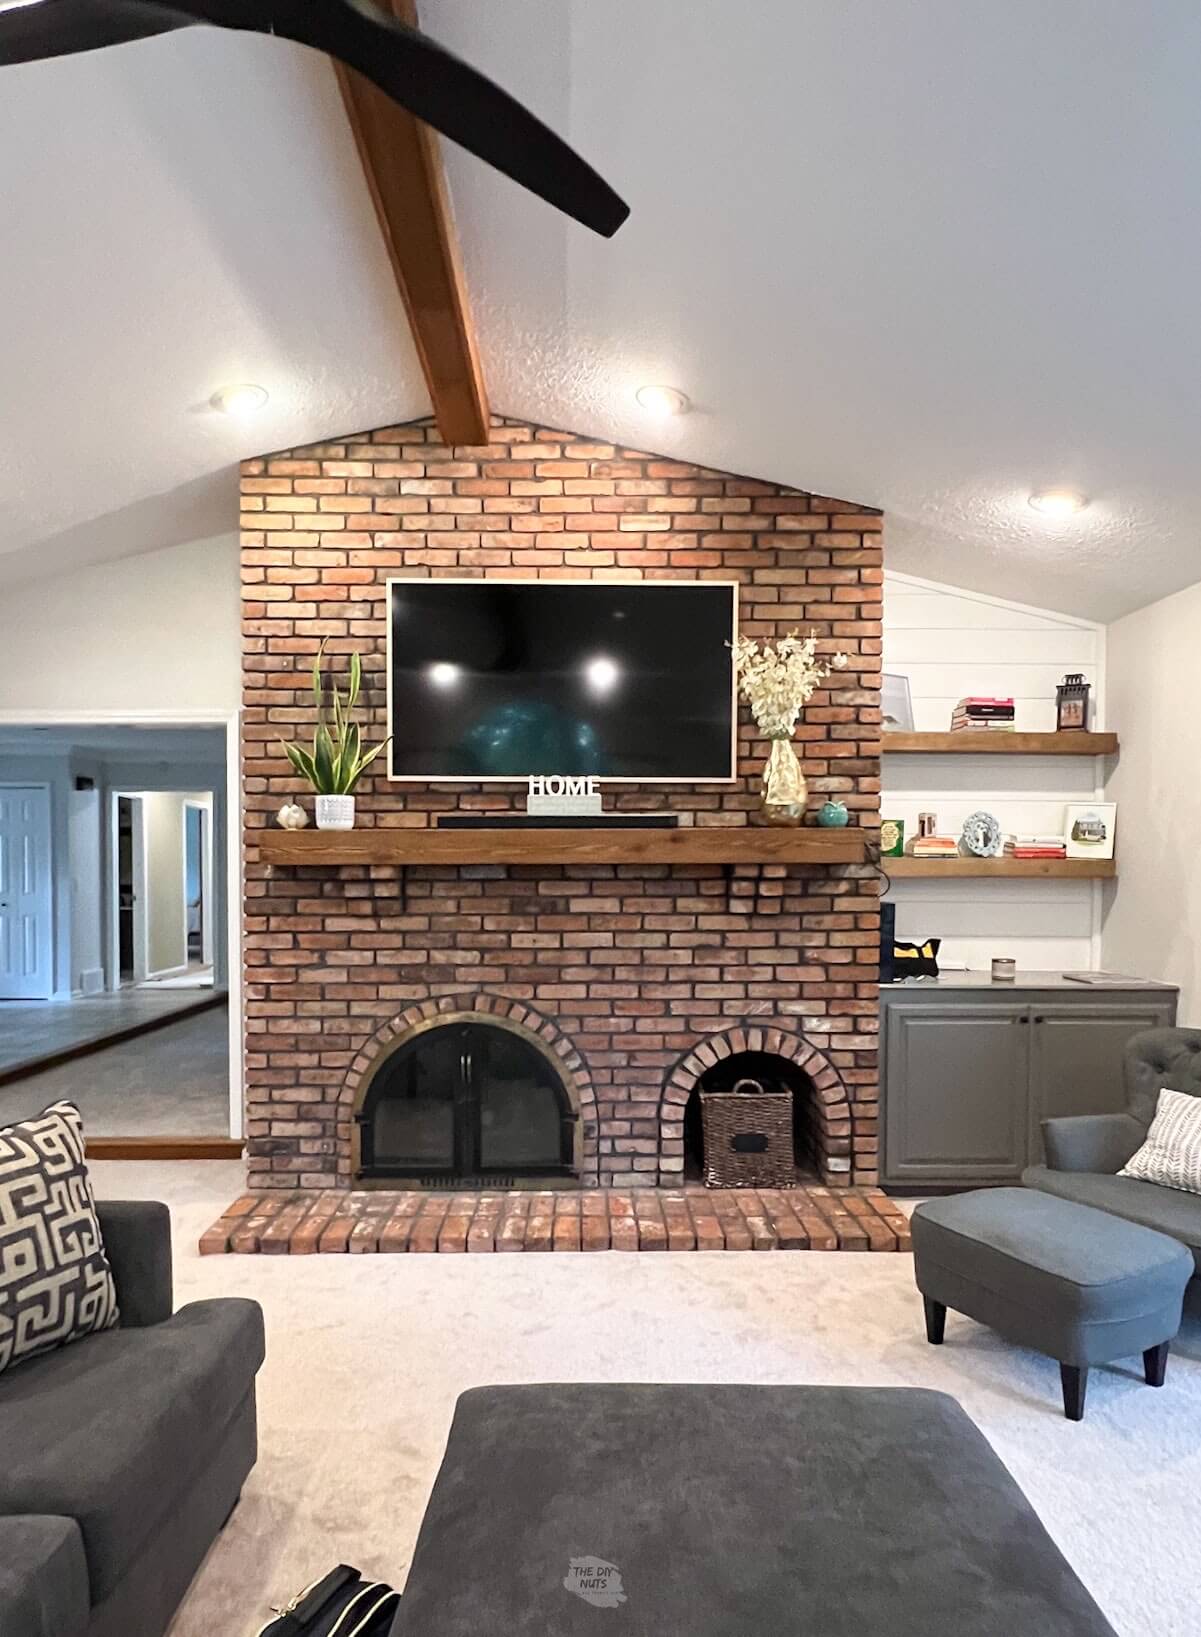 brown and red brick fireplace in living room.